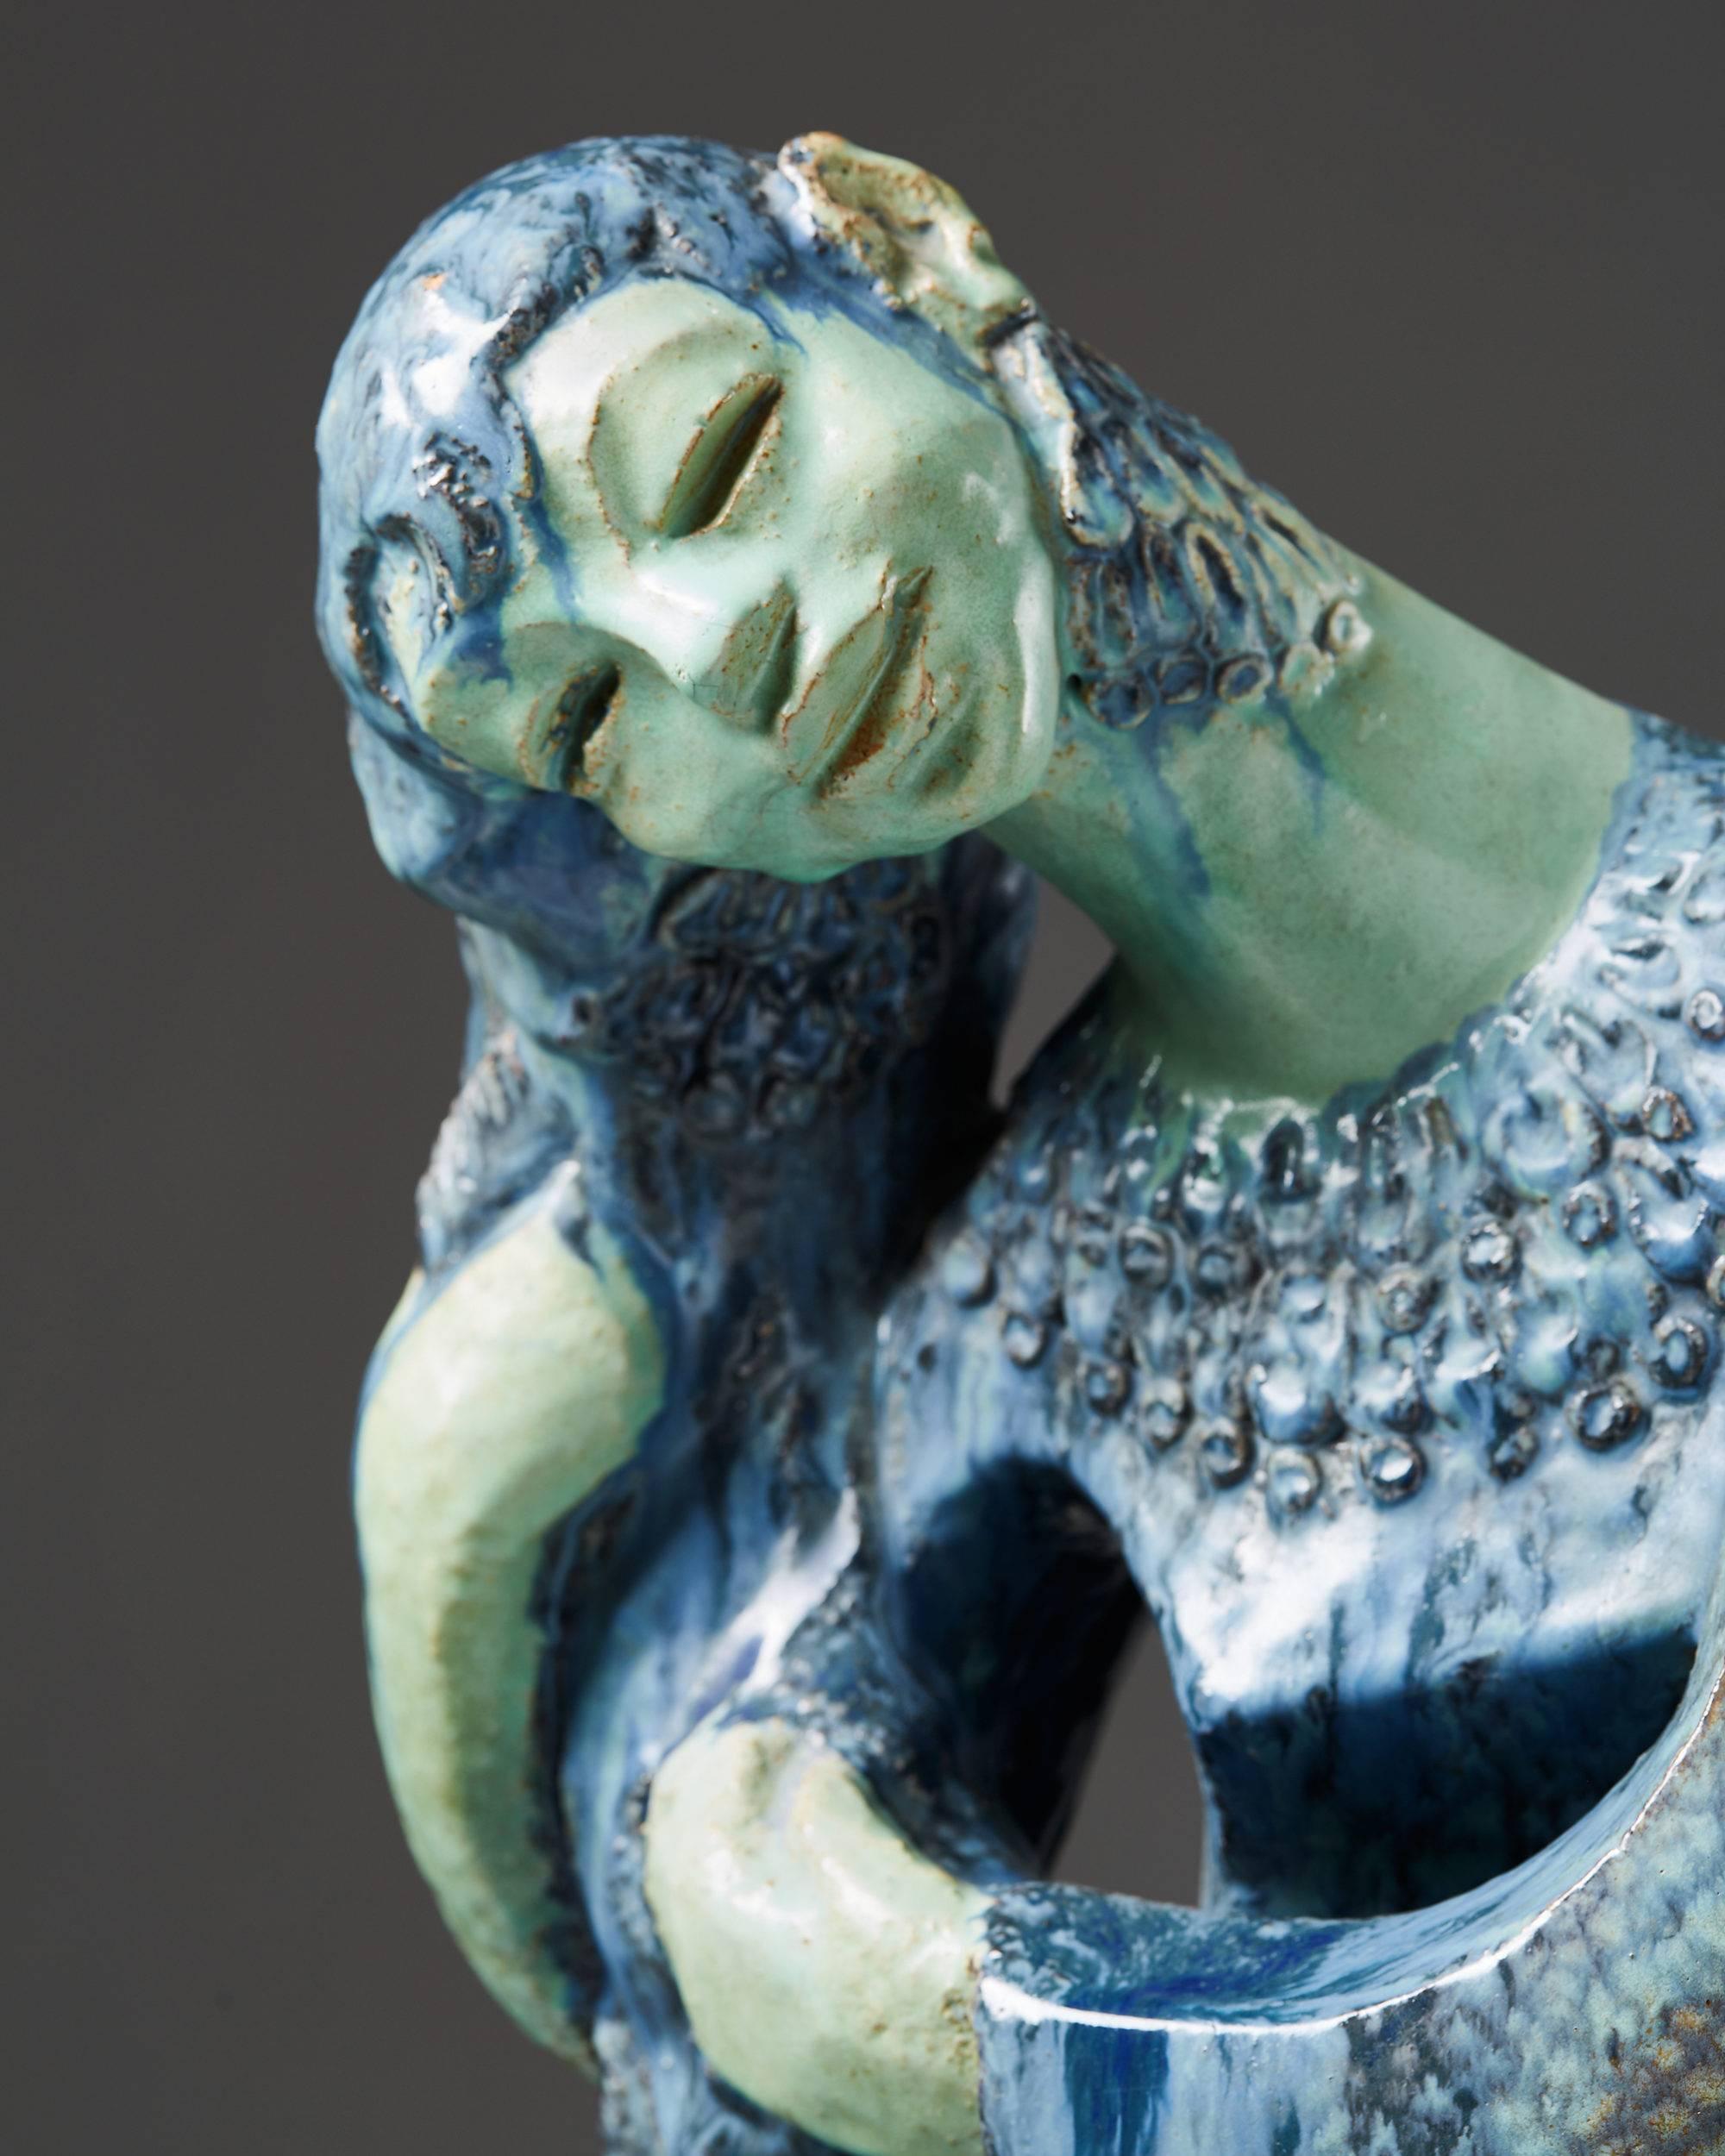 Mid-20th Century Female Figurine Sculpture by Hassan Heshmat Egypt 1960s Blue Teal Stoneware For Sale